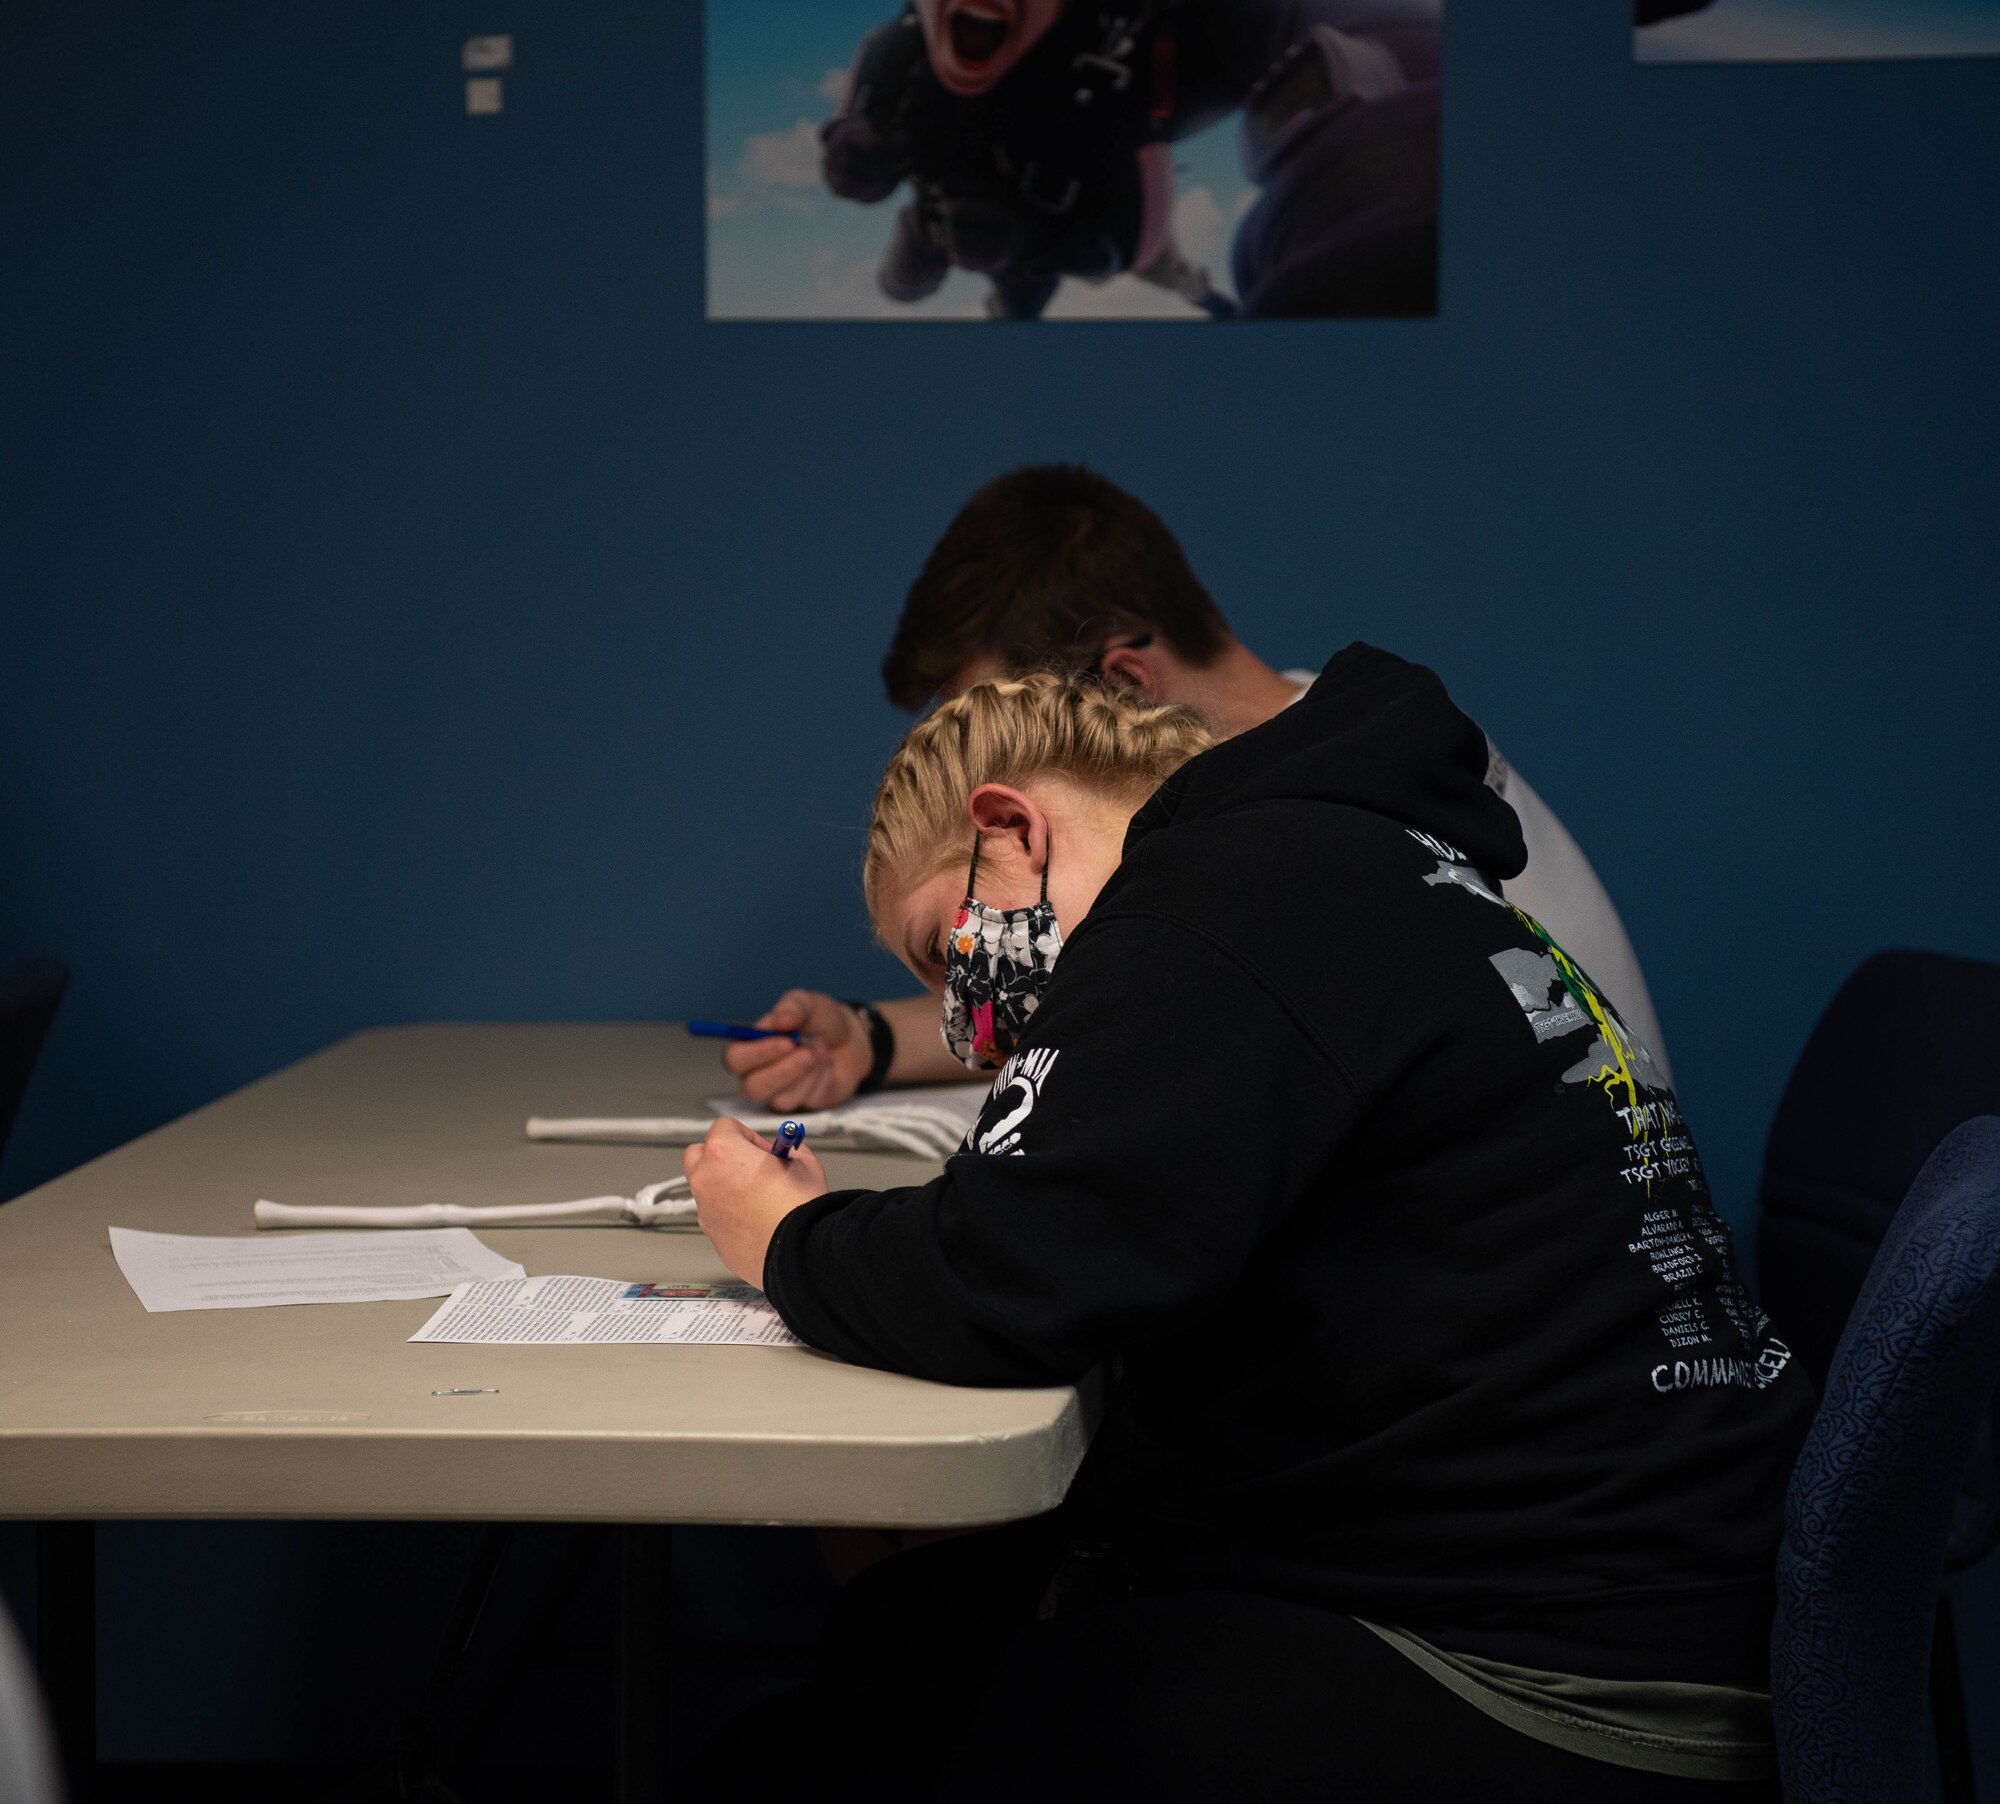 An Airman fills out paperwork before going skydiving.